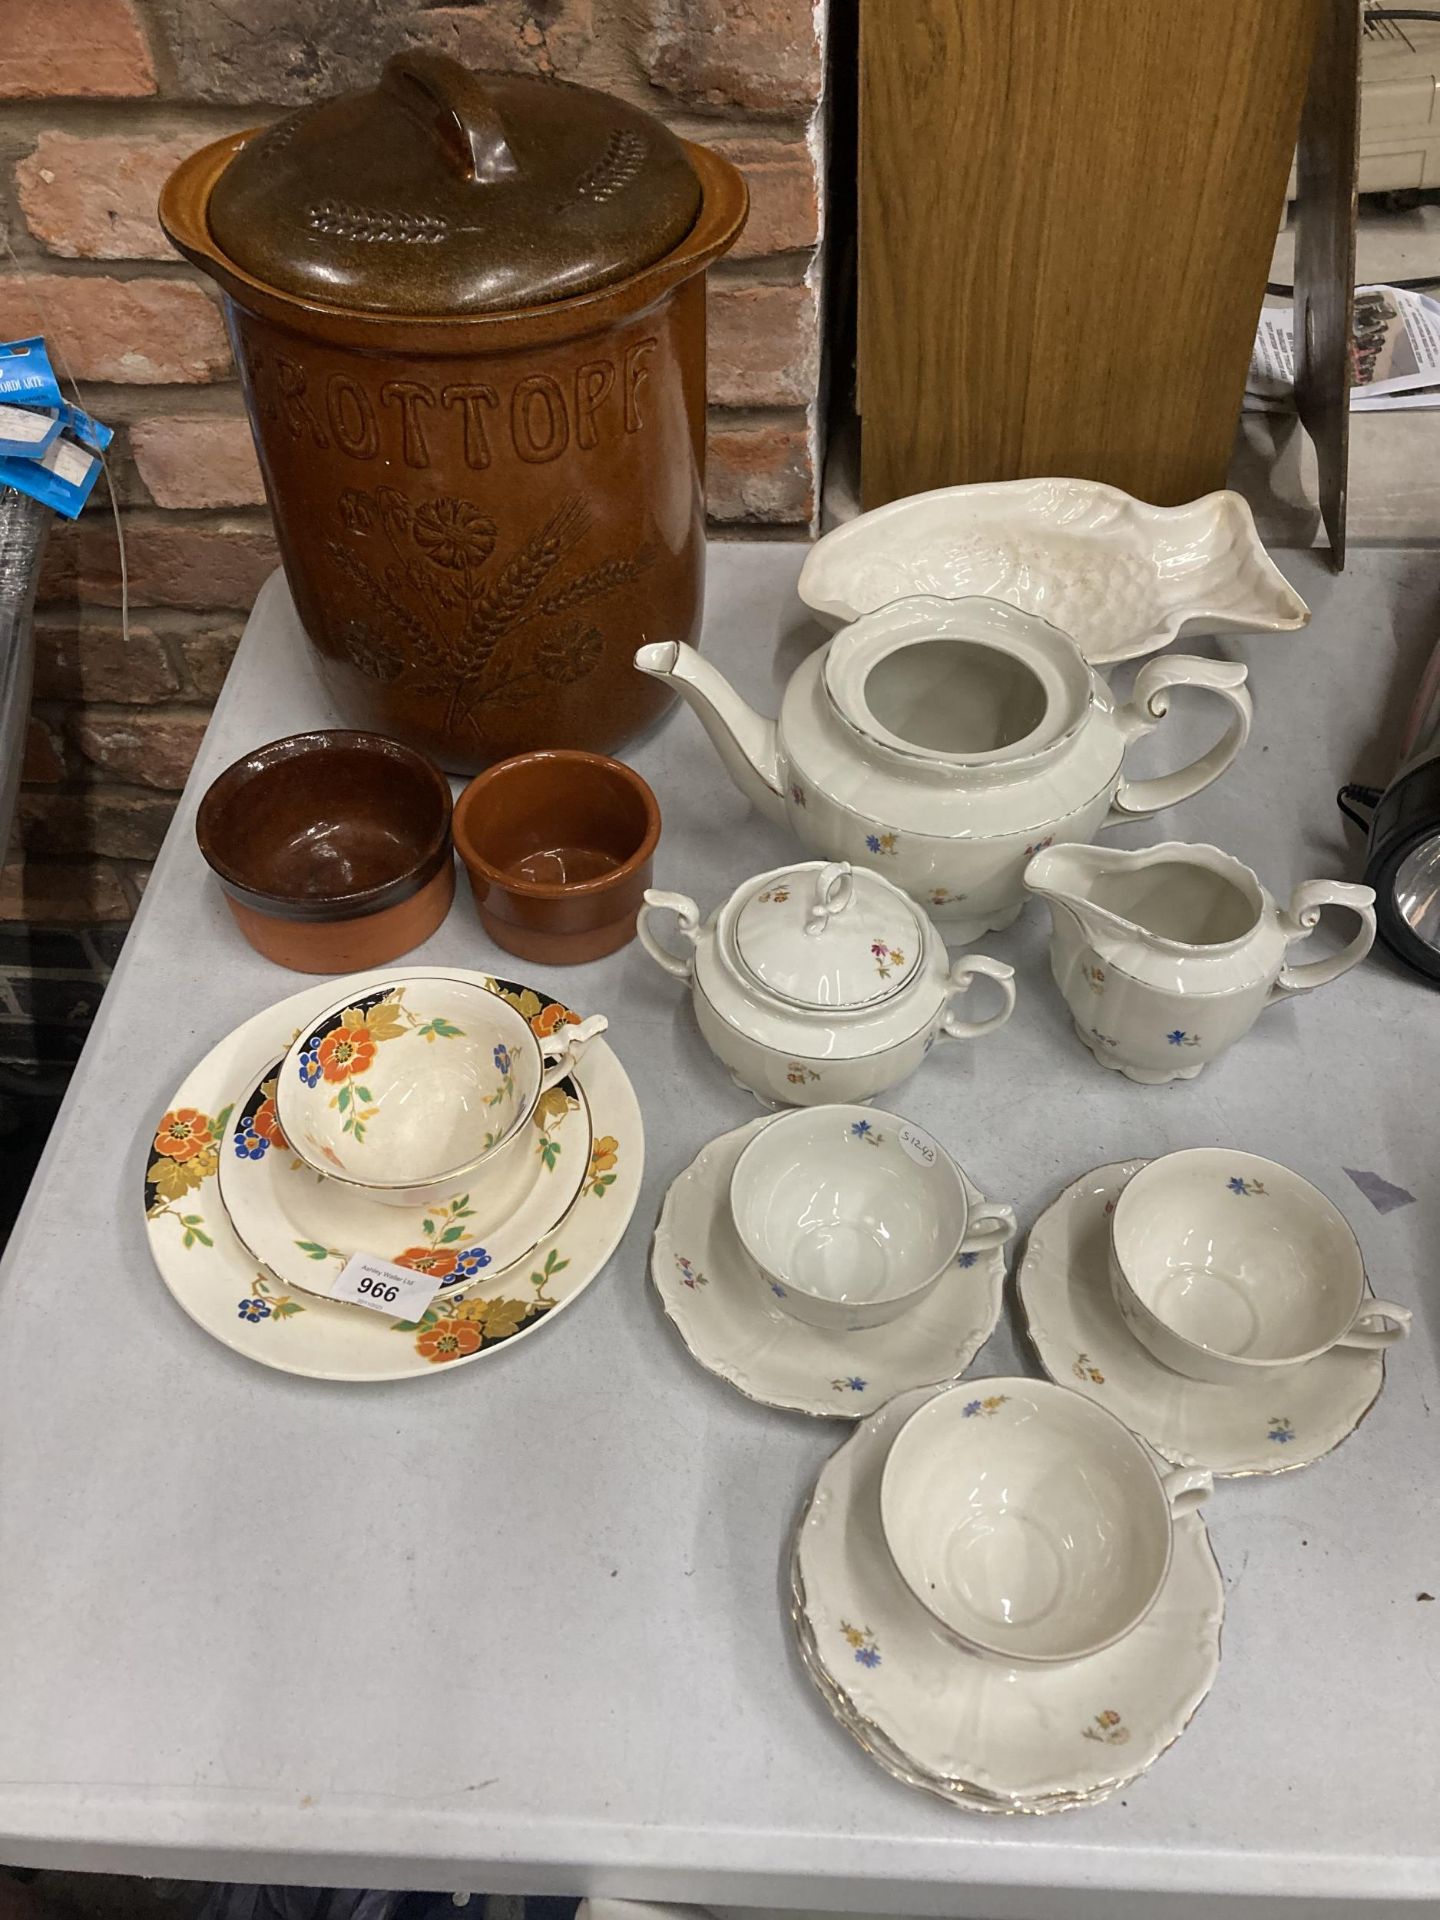 A GERMAN TEASET TO INCLUDE A TEAPOT - NO LID - A CREAM JUG, SUGAR BOWL, CUPS AND SAUCERS, A FLORAL